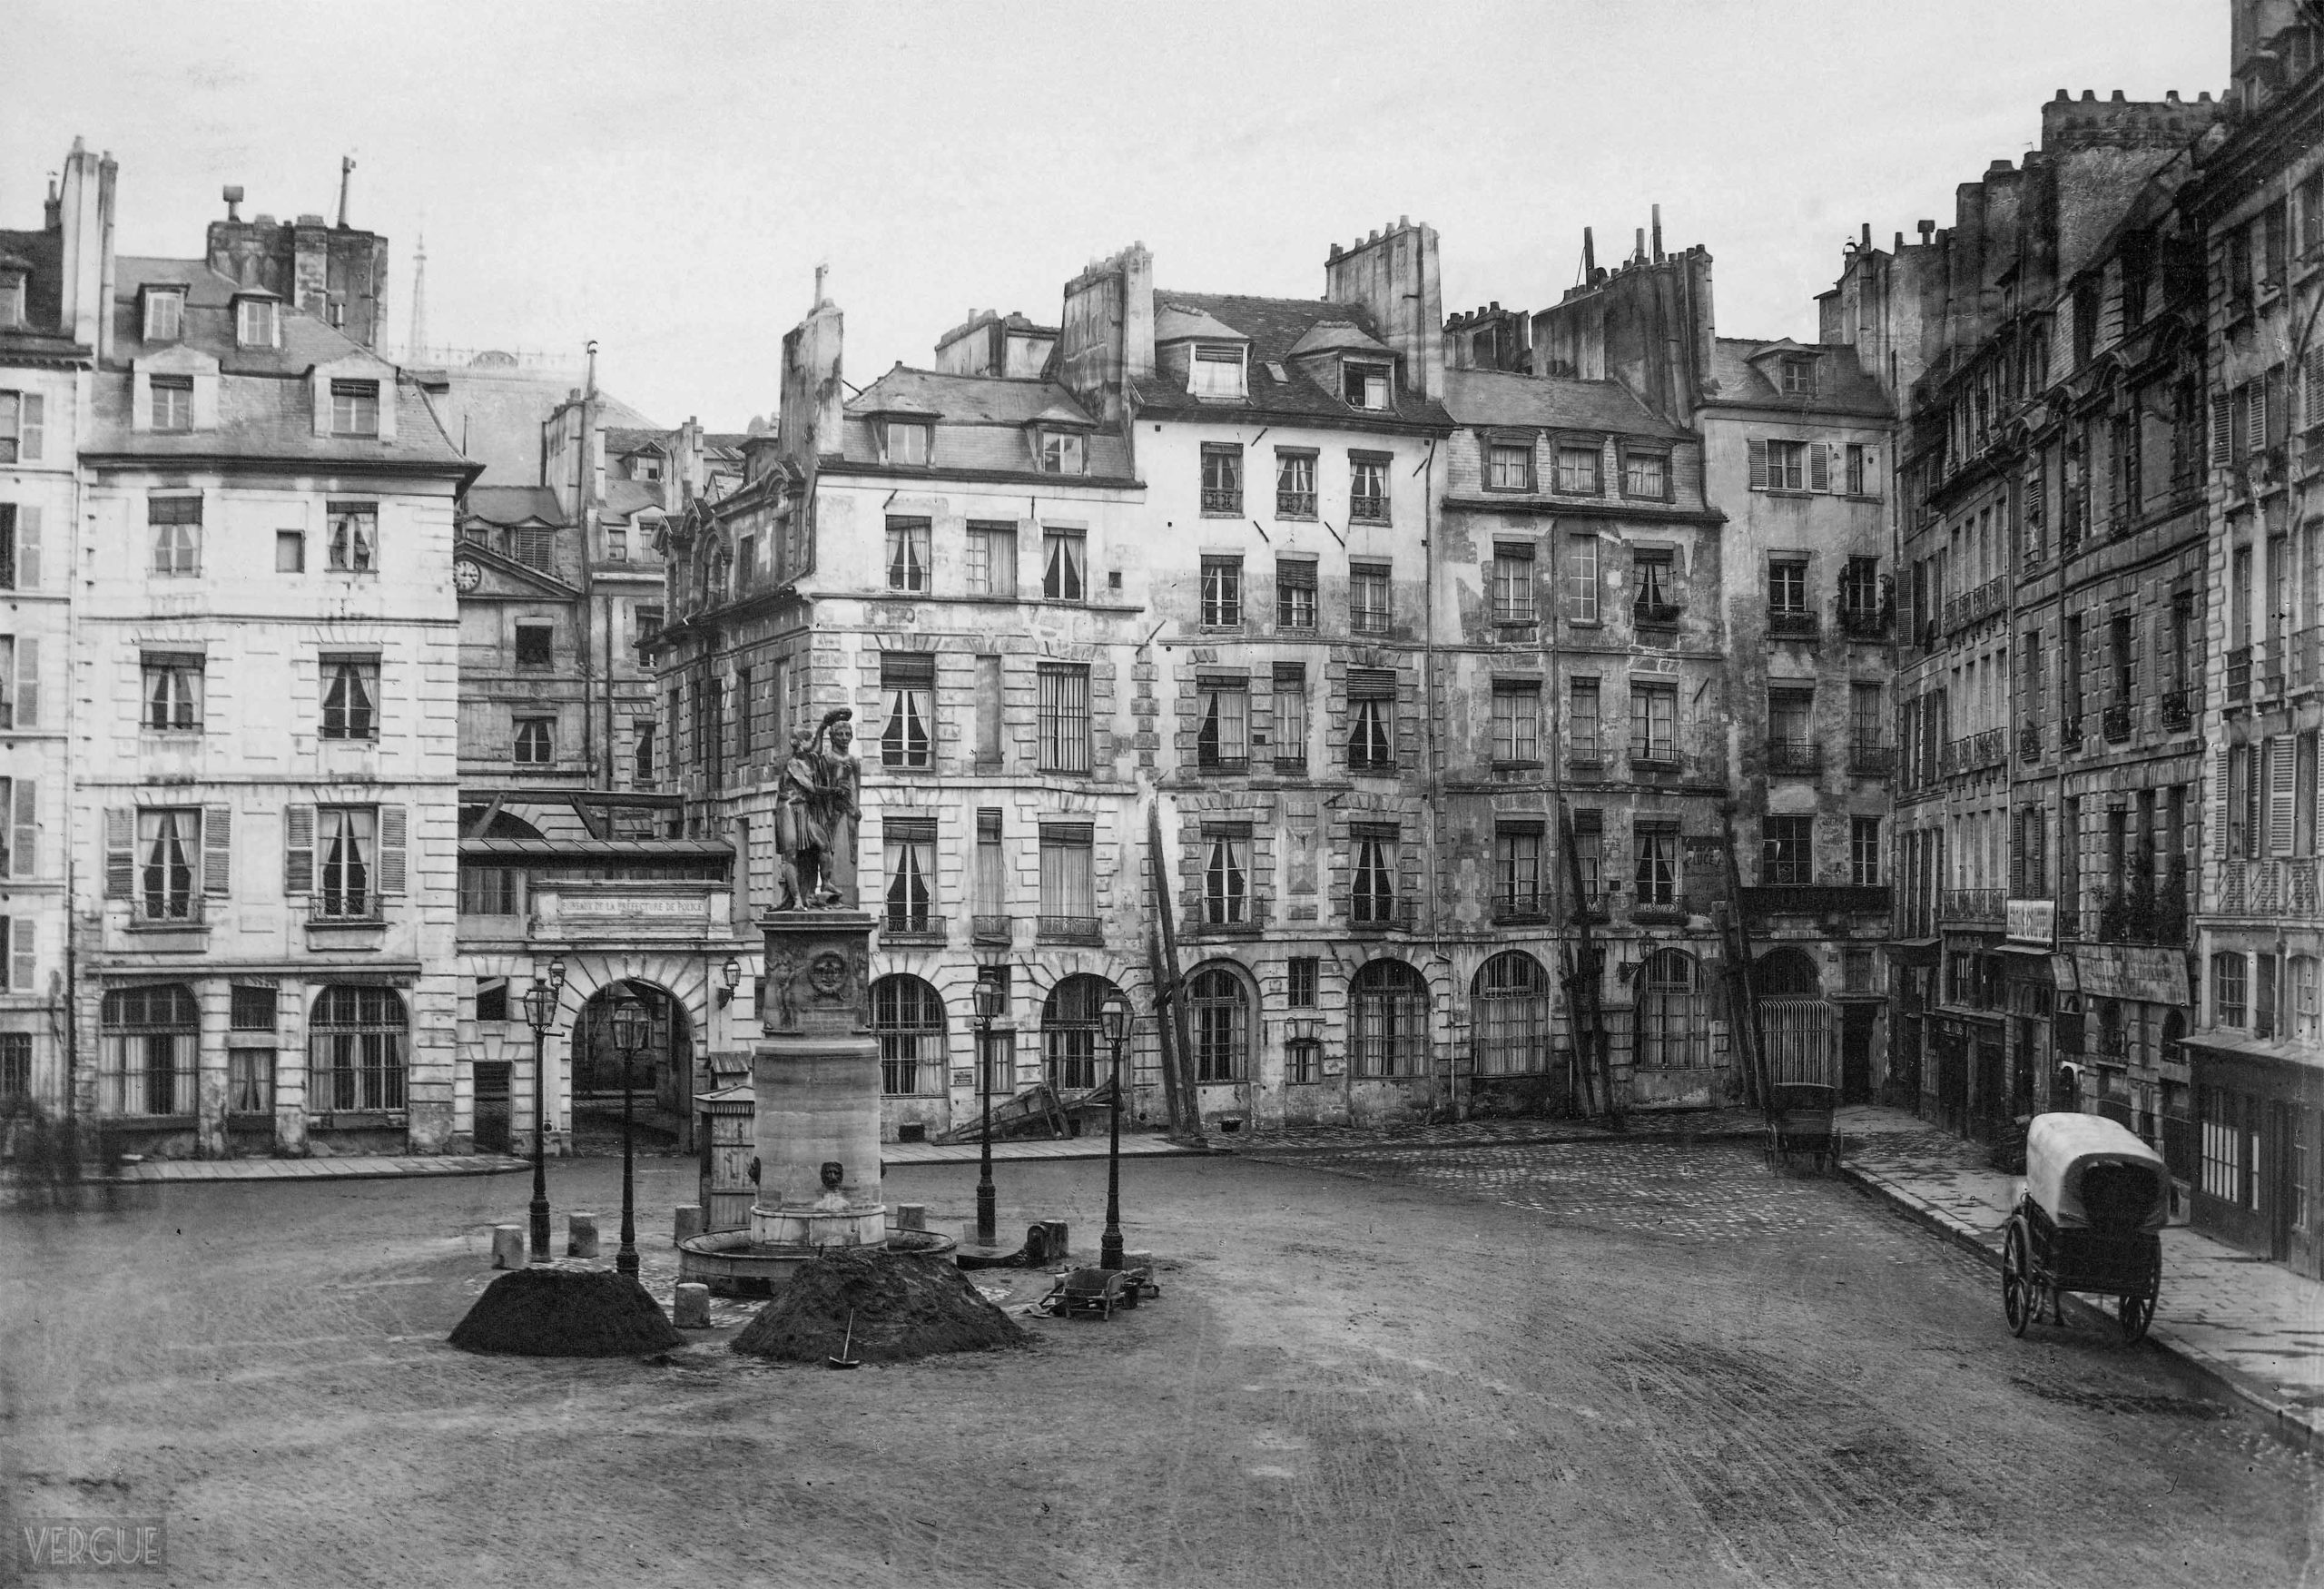 Place Dauphine circa 1865. Photo by Charles Marville [Public Domain via Wikimedia Commons]